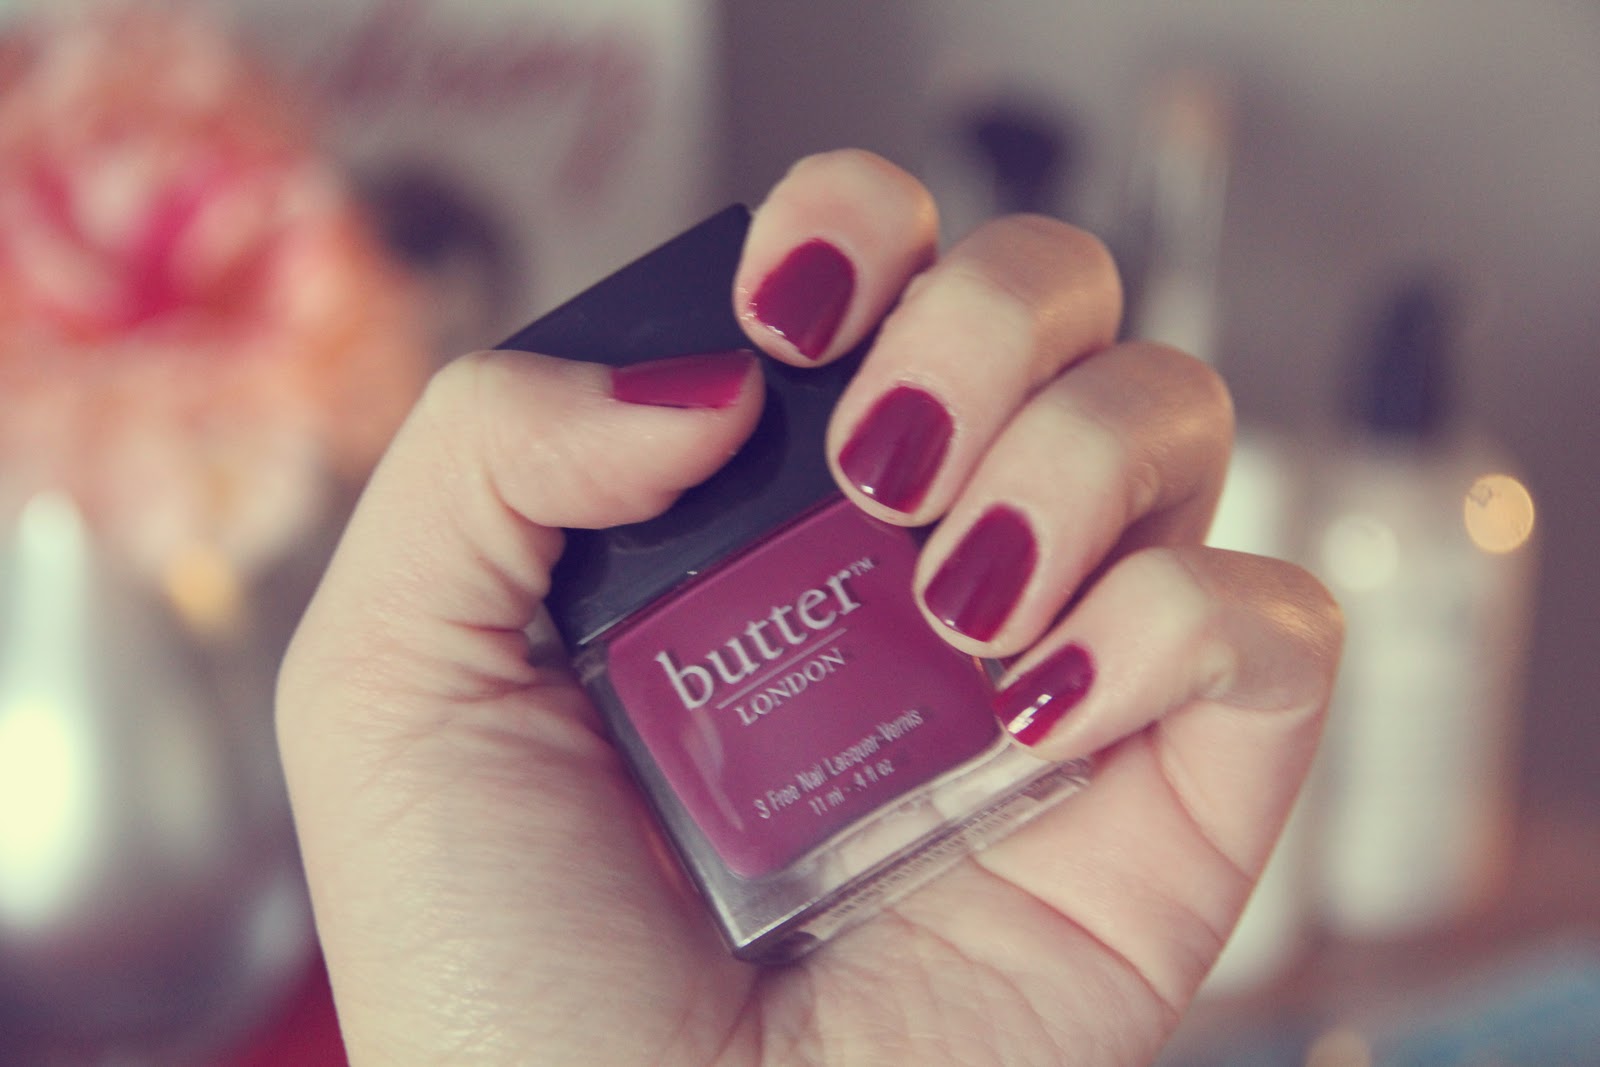 7. Butter London Nail Lacquer in "Queen Vic" - wide 7